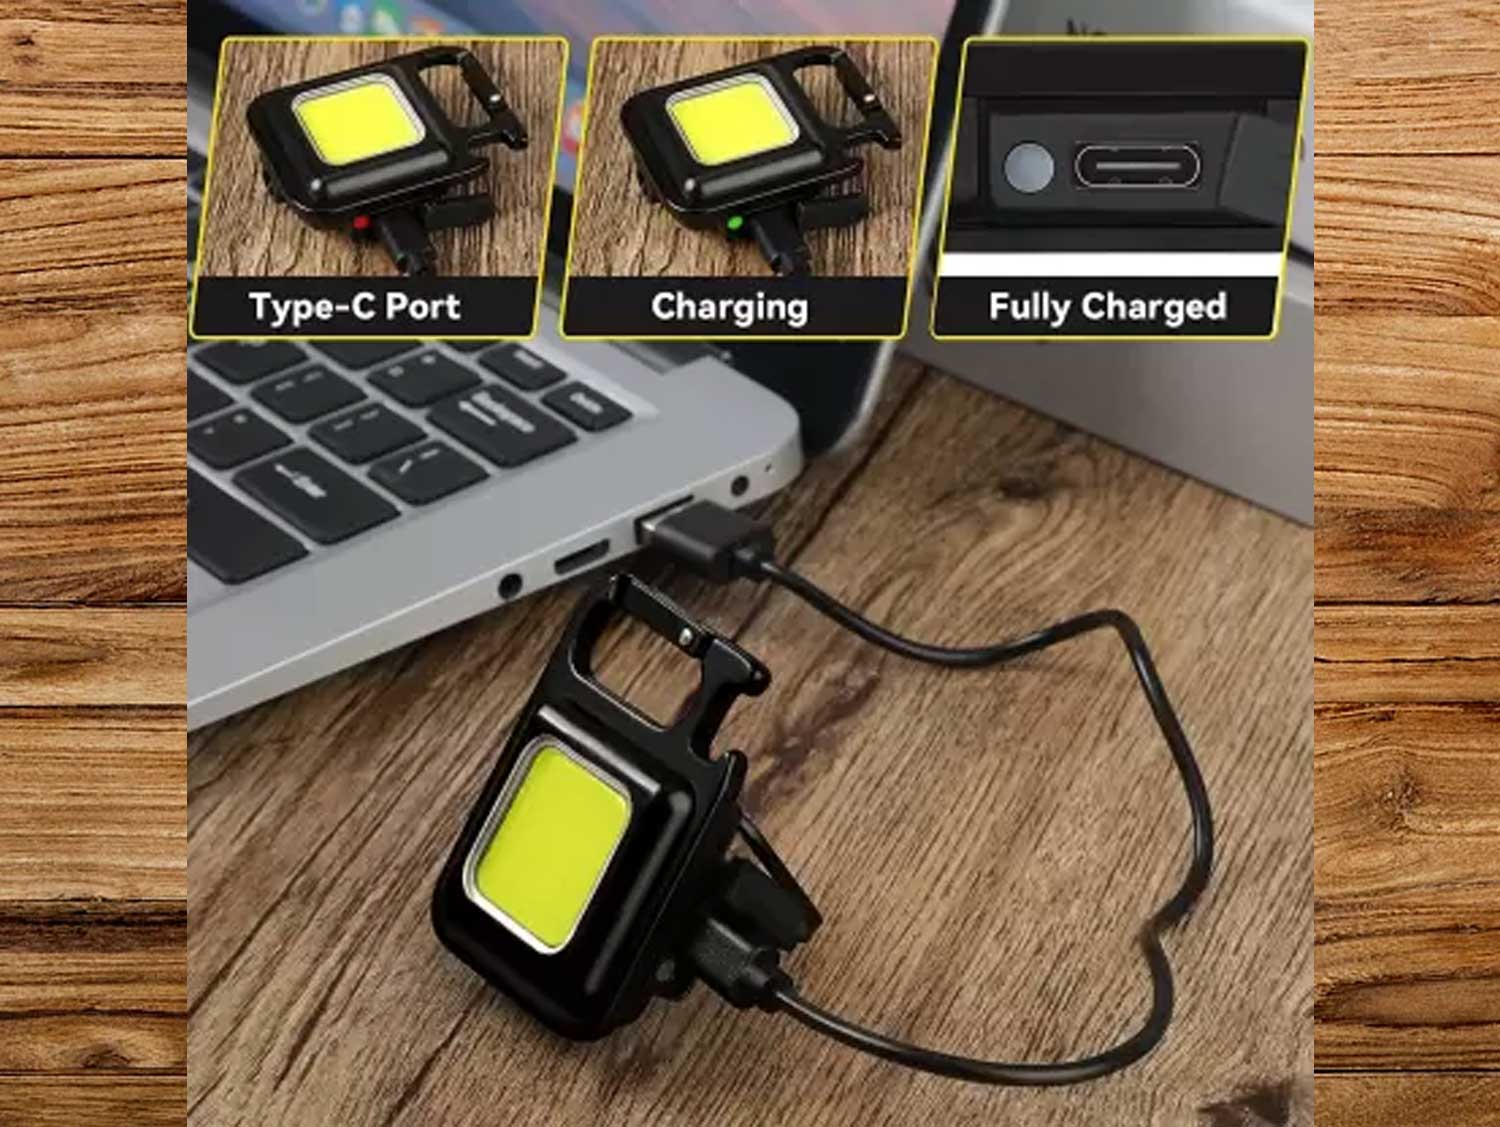 Compact COB LED Keychain Light – Carry It Everywhere